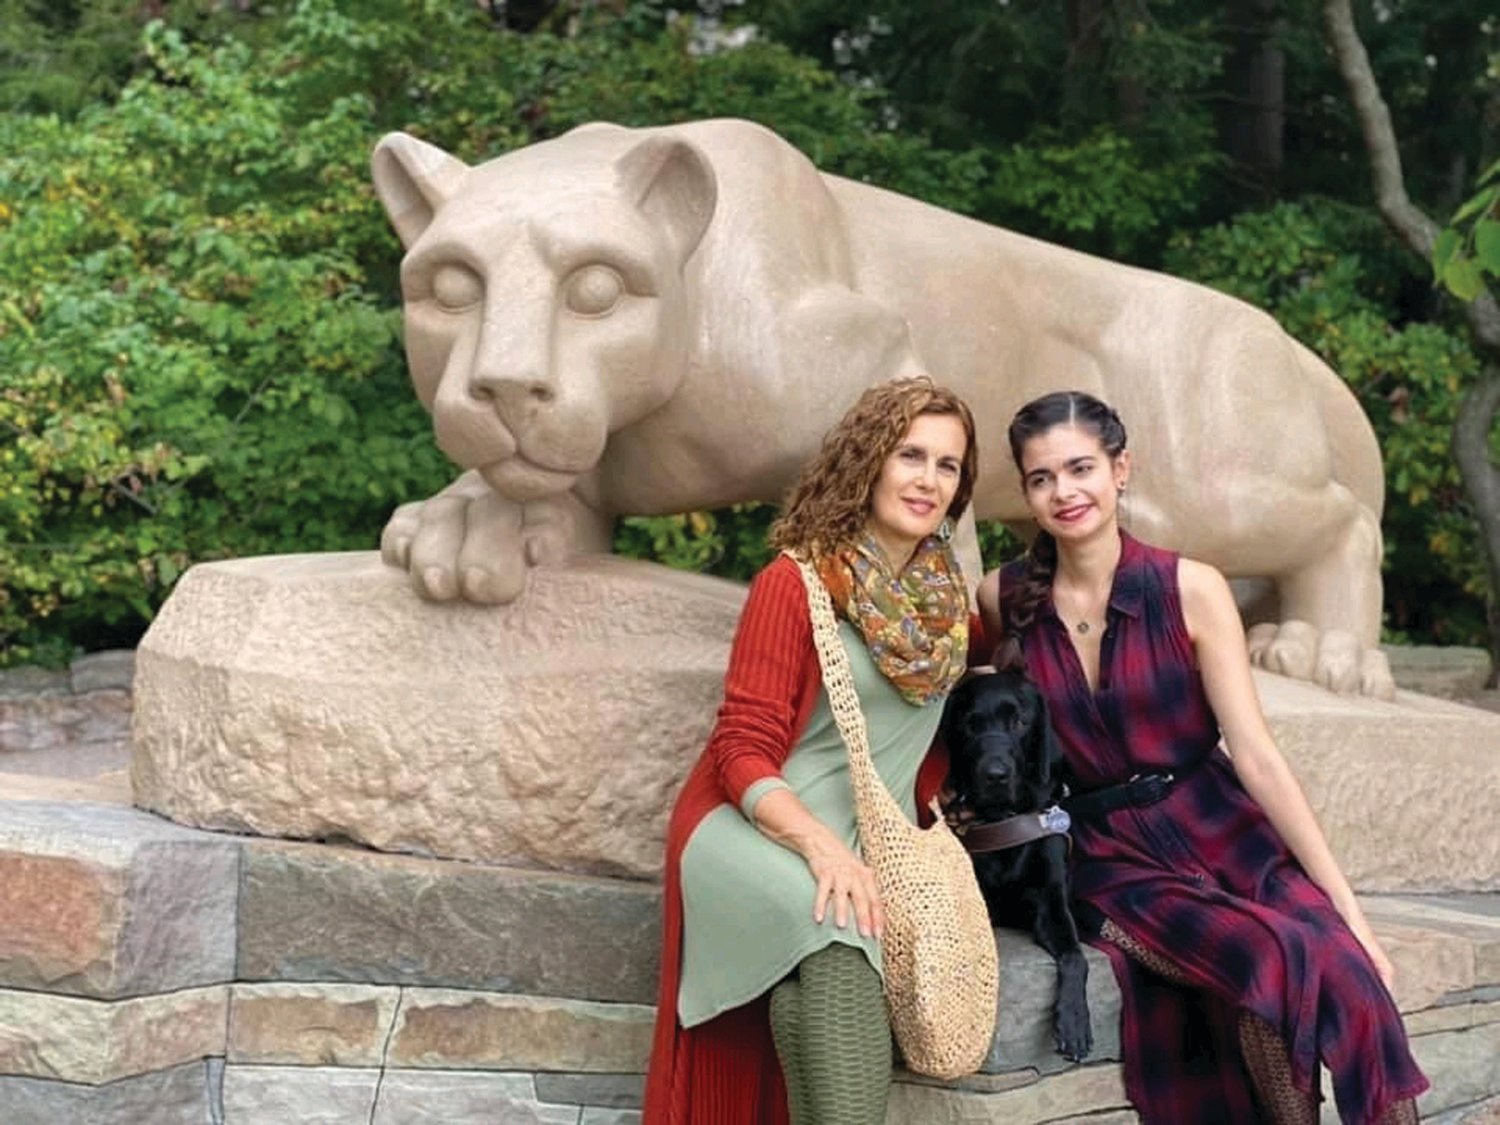 WE ARE: Aria Mia Loberti poses with her mother, Audrey, and her guide dog Ingrid, taken in front of the Nittany Lion on the Penn State campus last October.